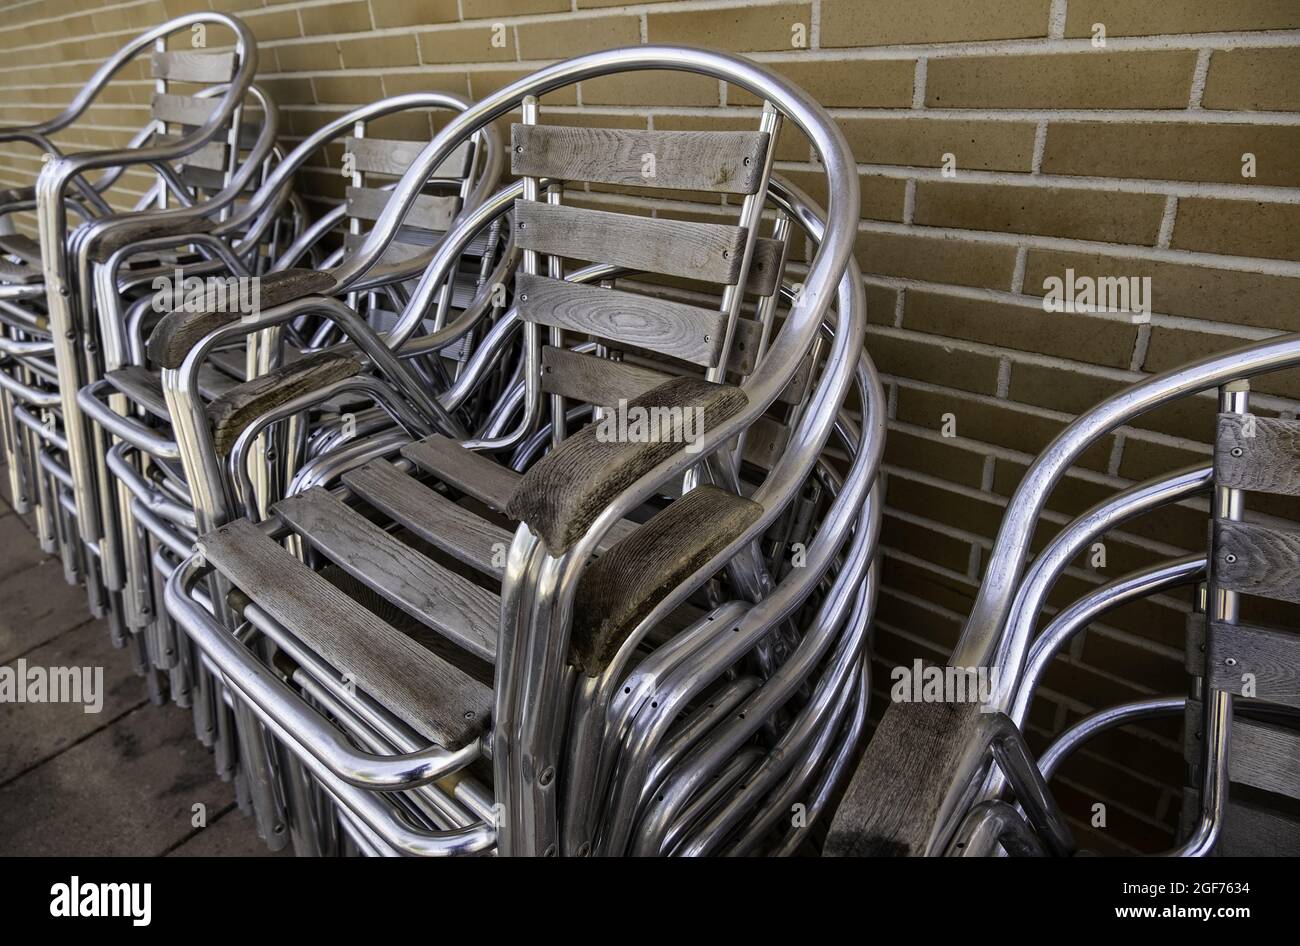 Detail of chairs for rest and relaxation in an outdoor space Stock Photo